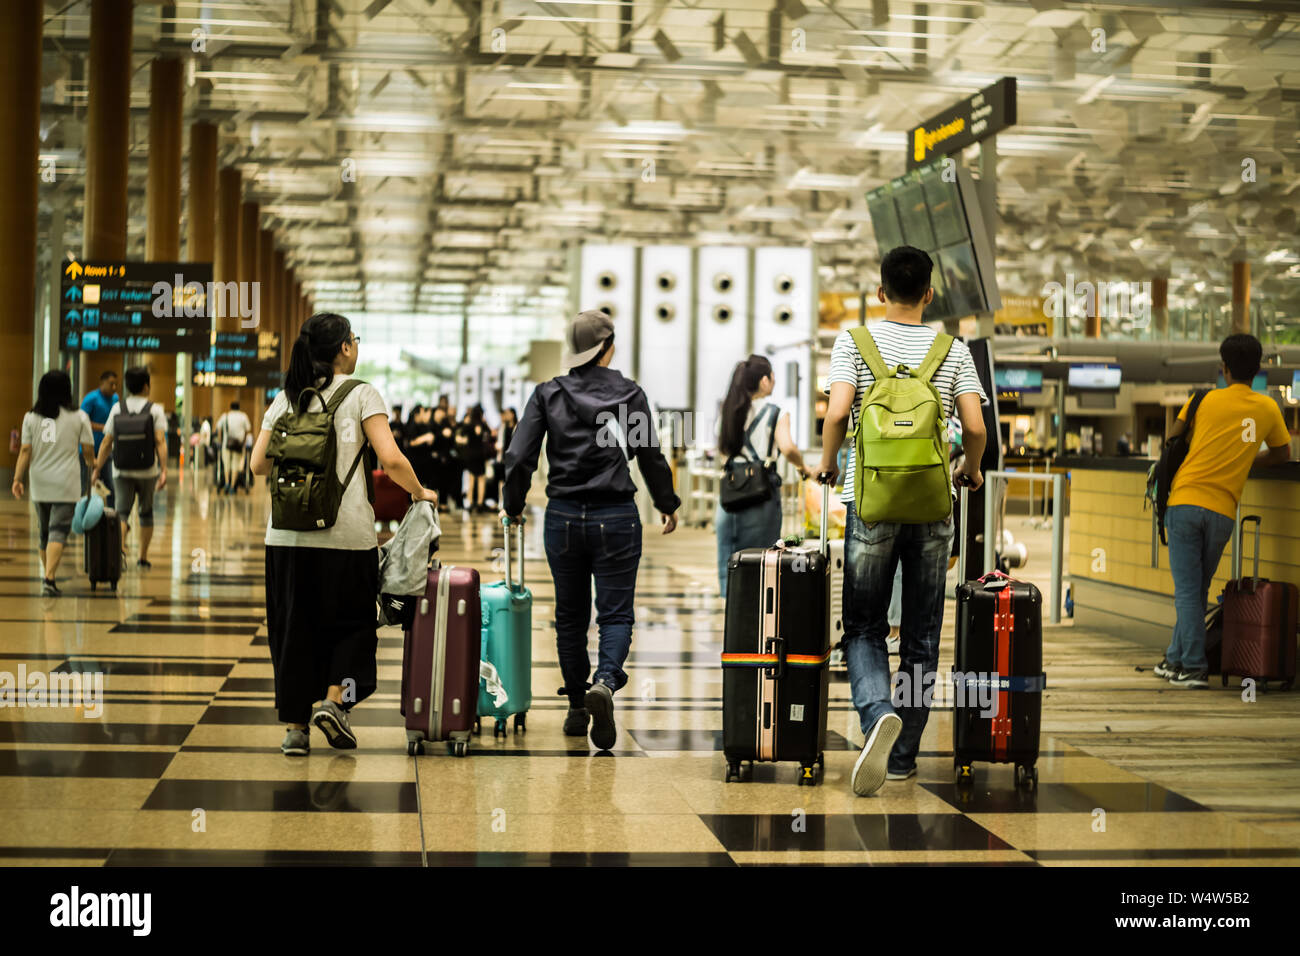 Singapore - April 4,2018: Travellers proceed to check in their luggage at T3 Changi International Airport departure hall. Stock Photo